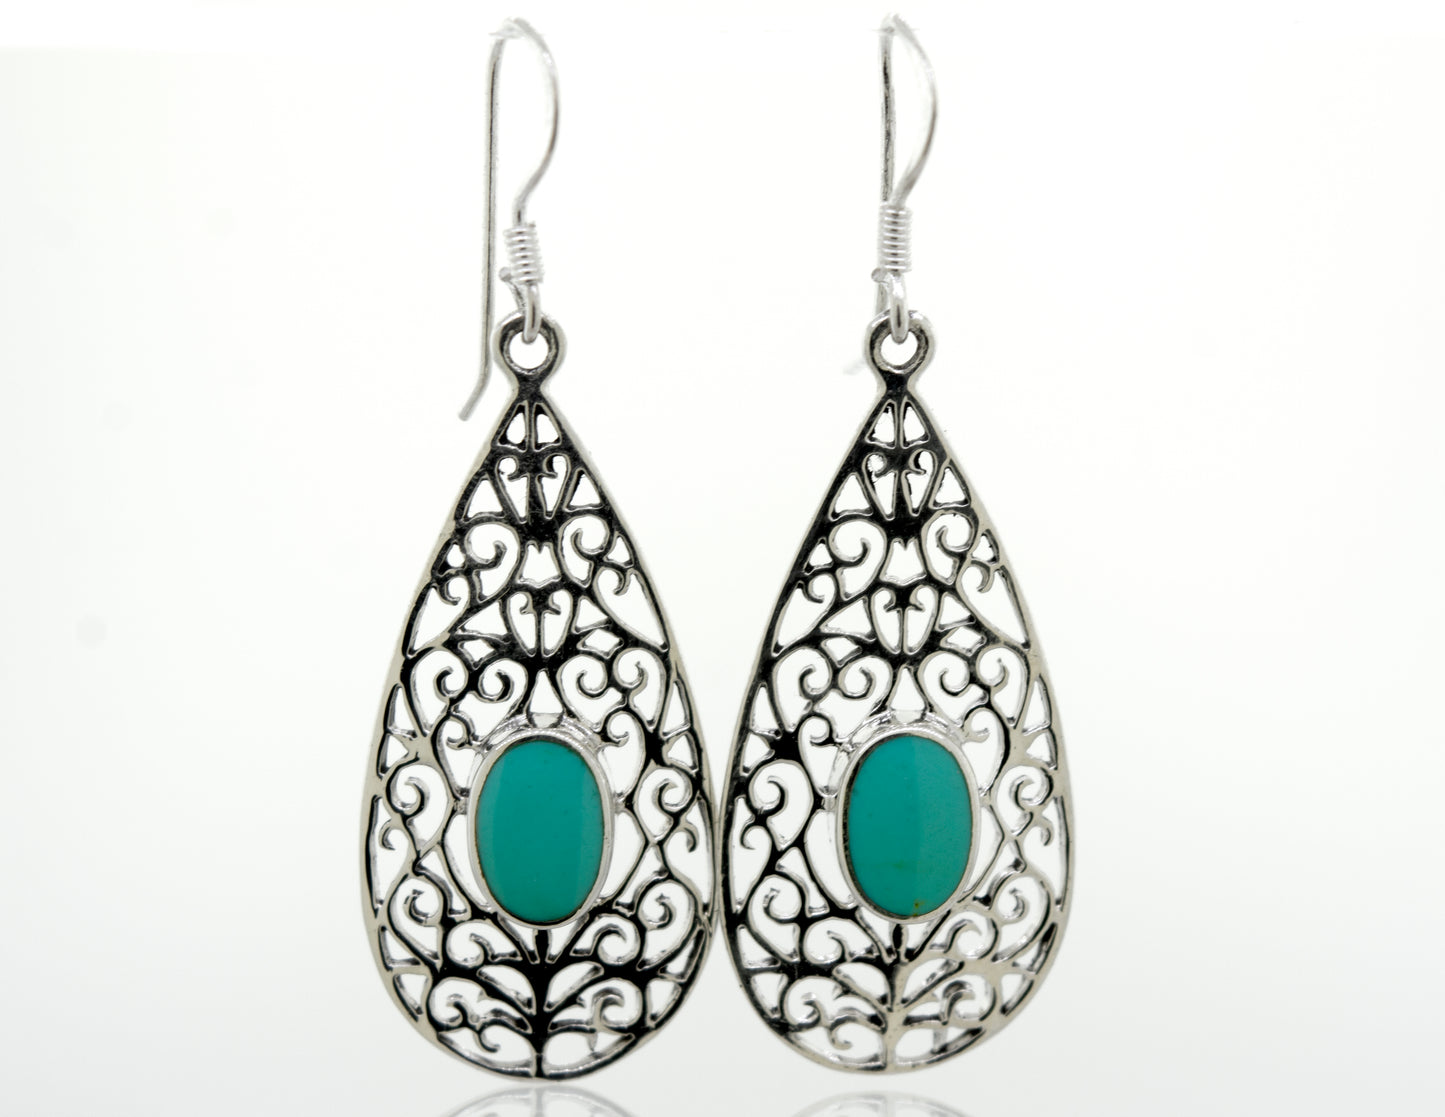 
                  
                    A pair of Elegant Teardrop Shape Turquoise Earrings with a filigree design, made from sterling silver, by Super Silver.
                  
                